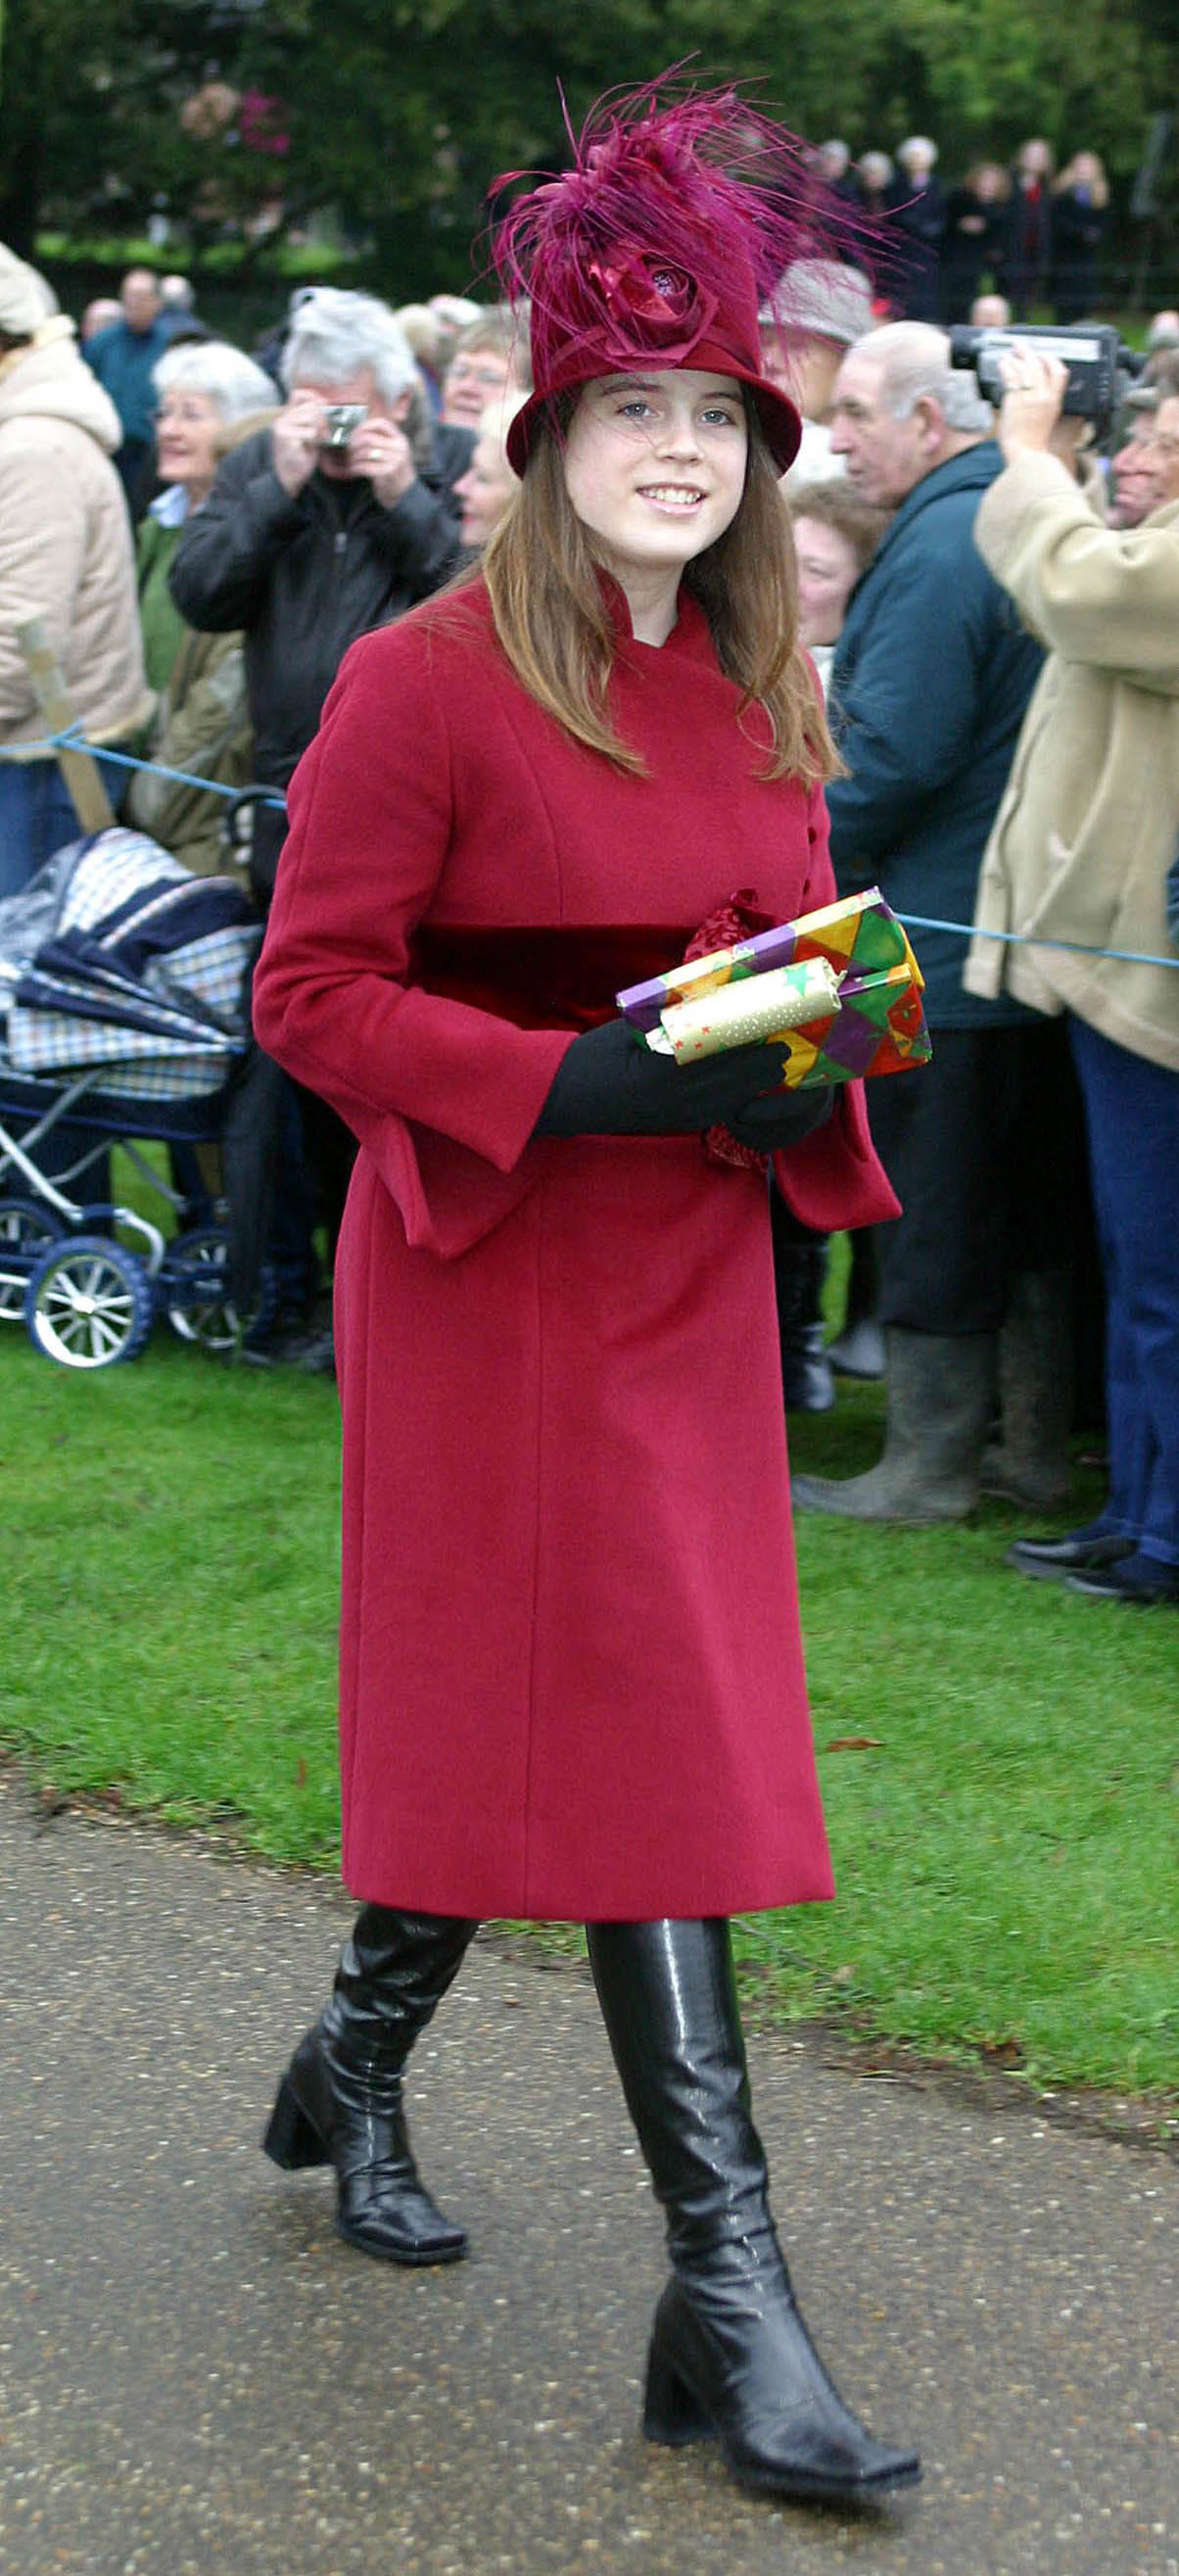 Princess Eugenie attends the Christmas morning service at Sandringham Church in December 2002. | Source: Getty Images